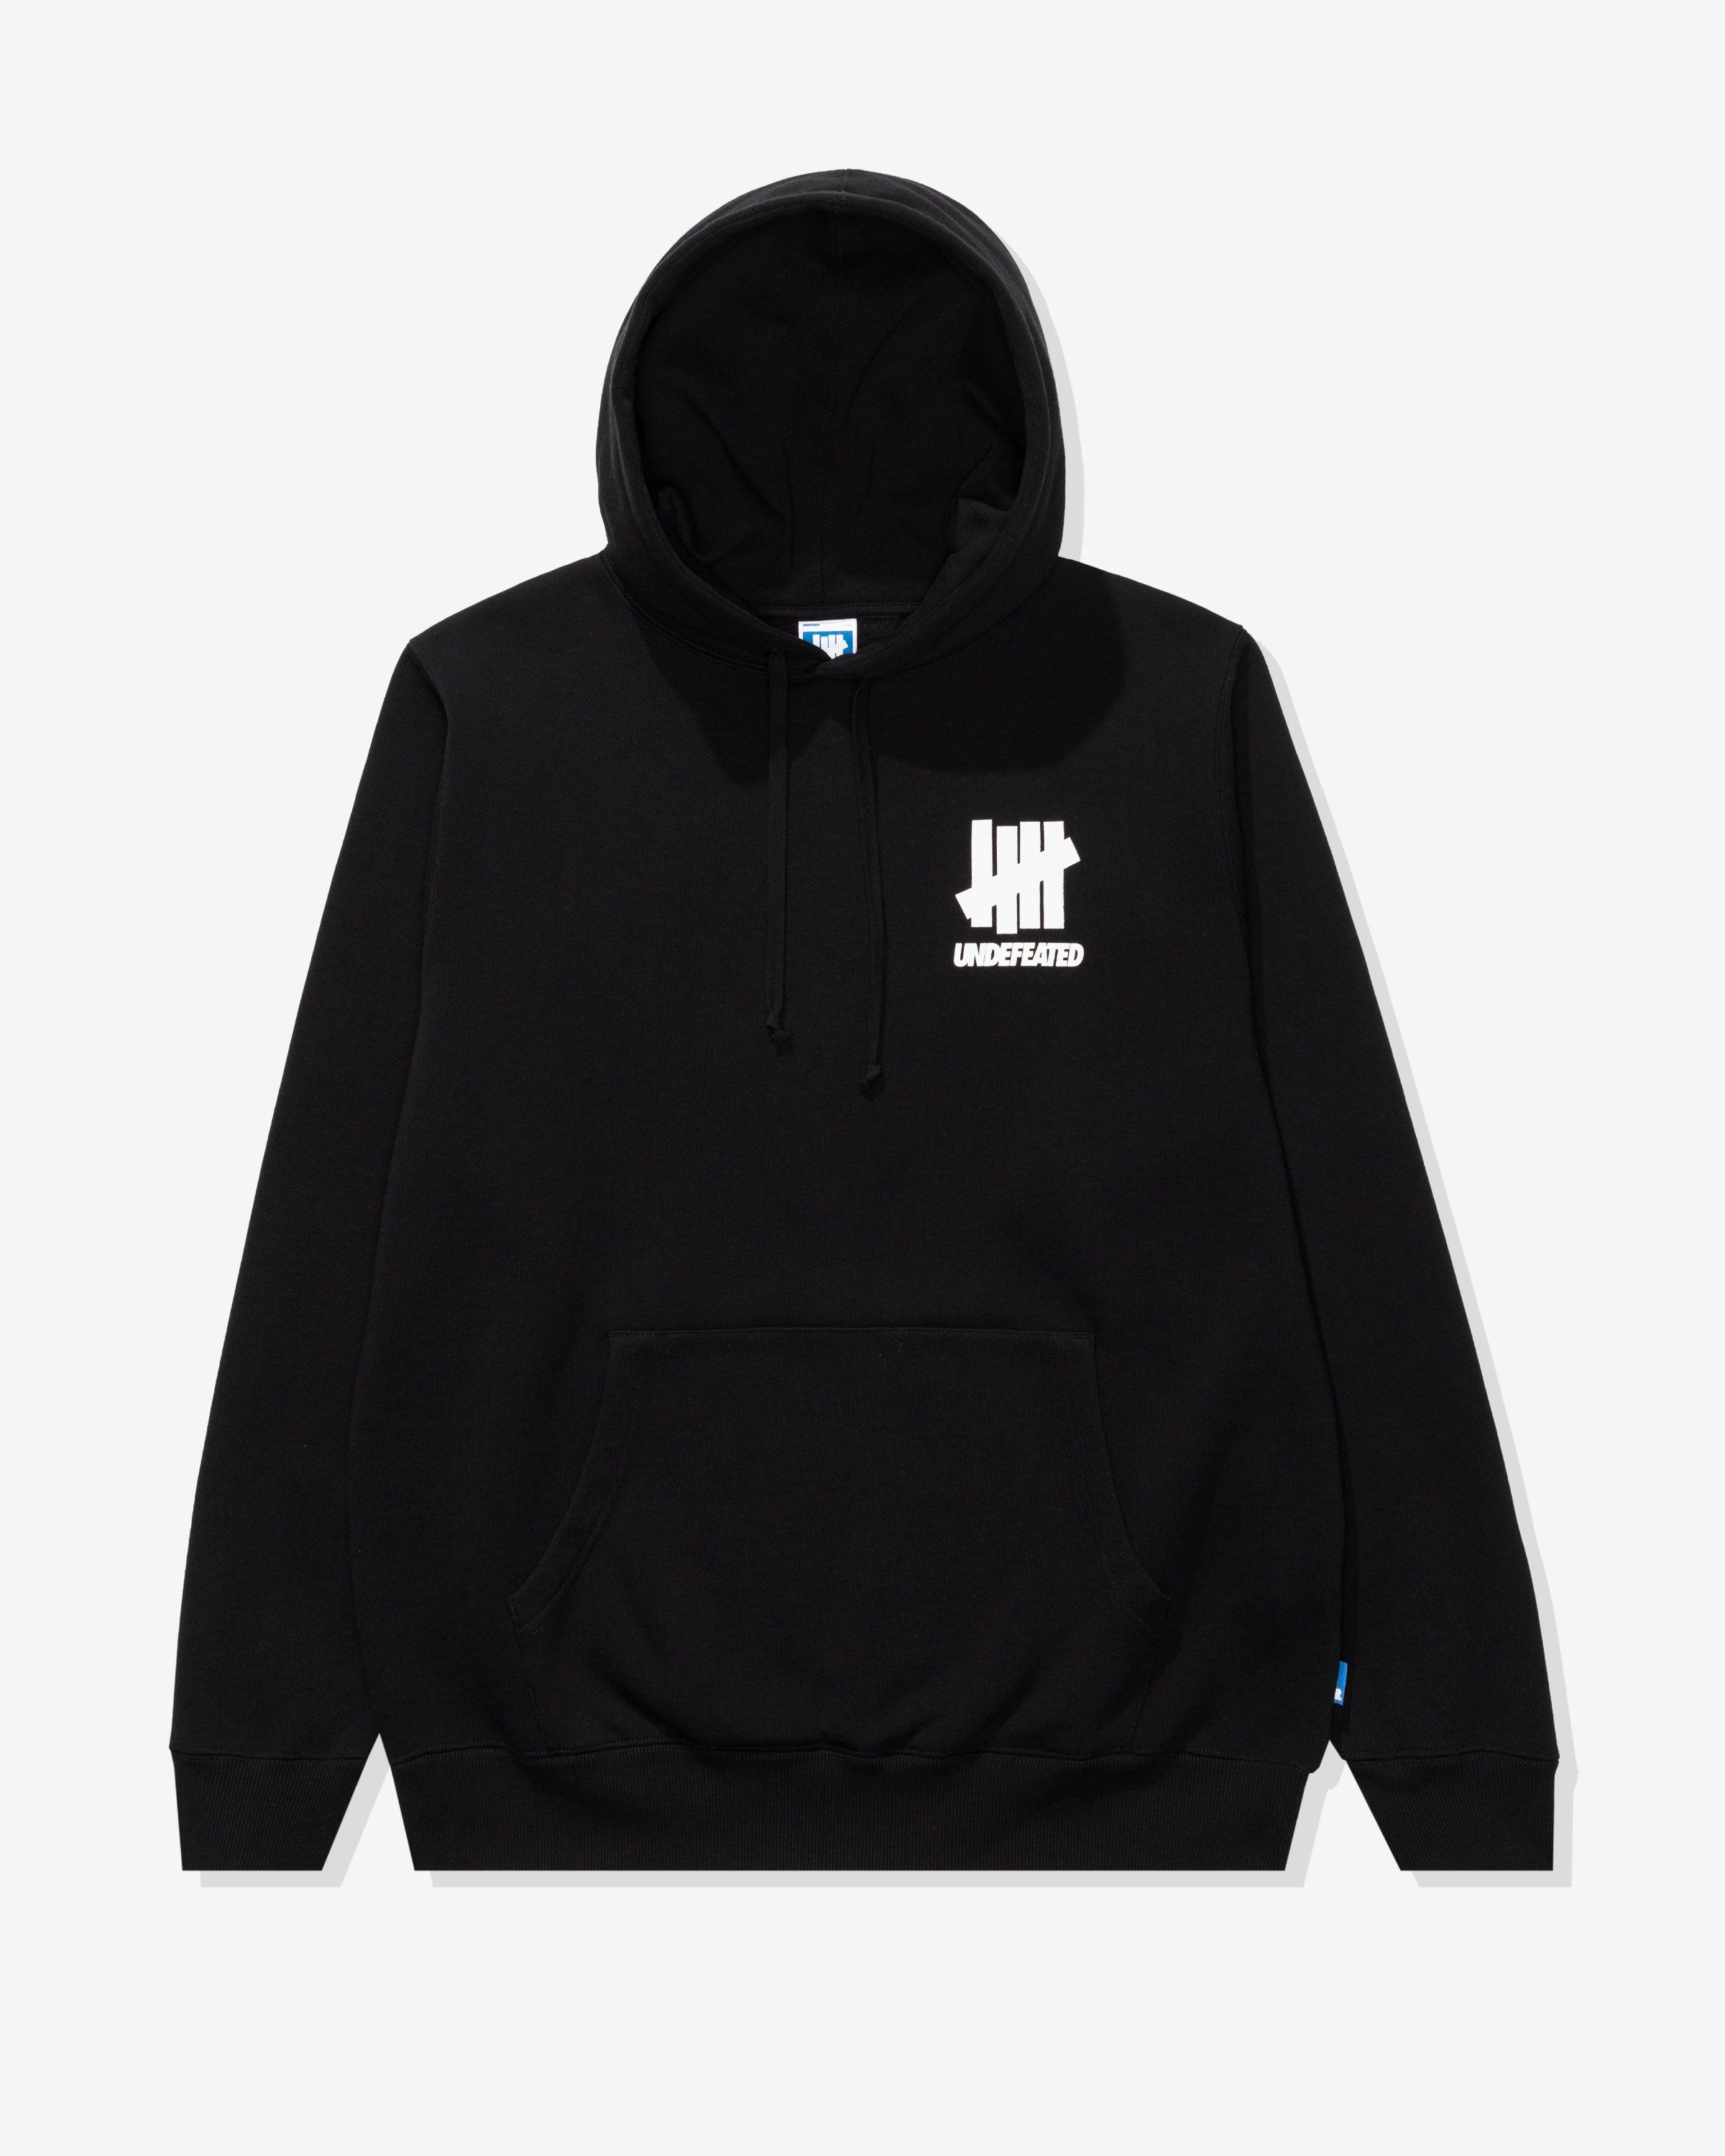 UNDEFEATED LOGO LOCKUP PULLOVER HOODIE-